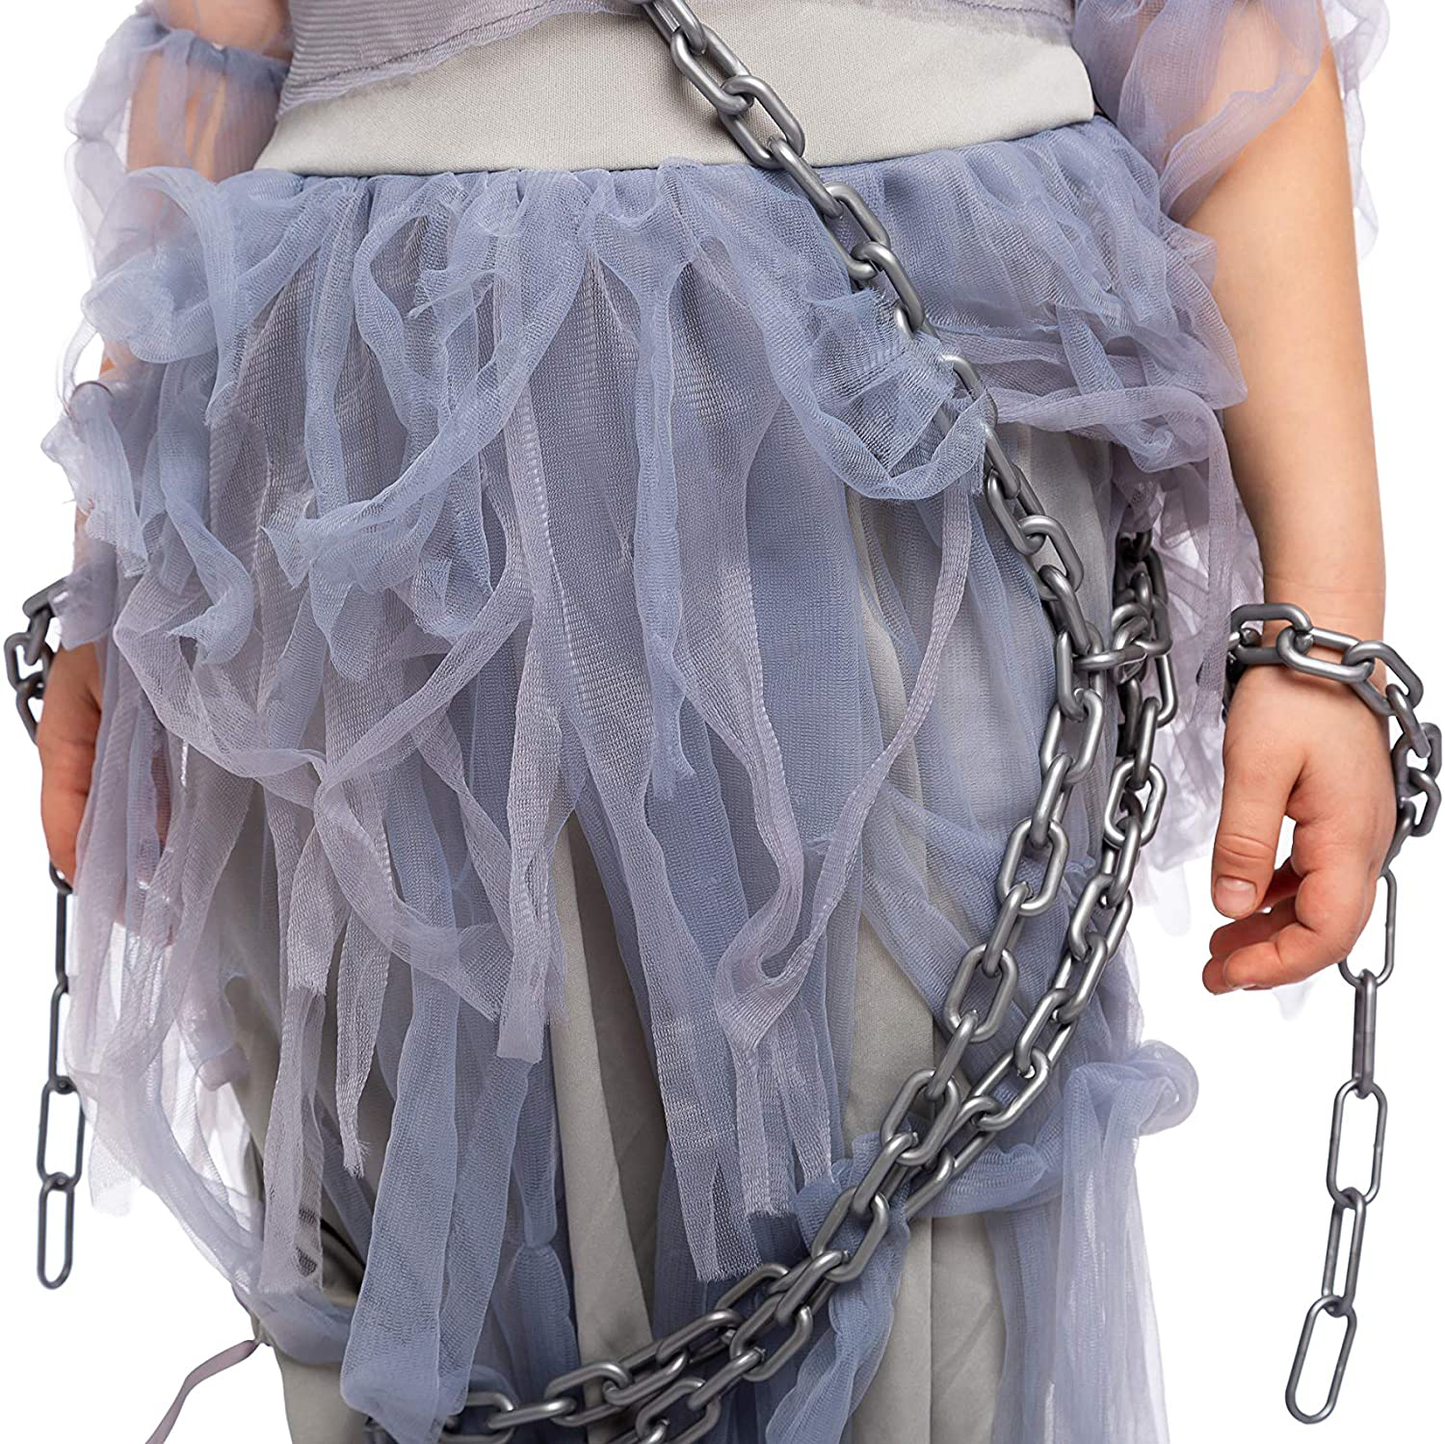 Spooktacular Creations Haunting Beauty Ghost Girl Costume